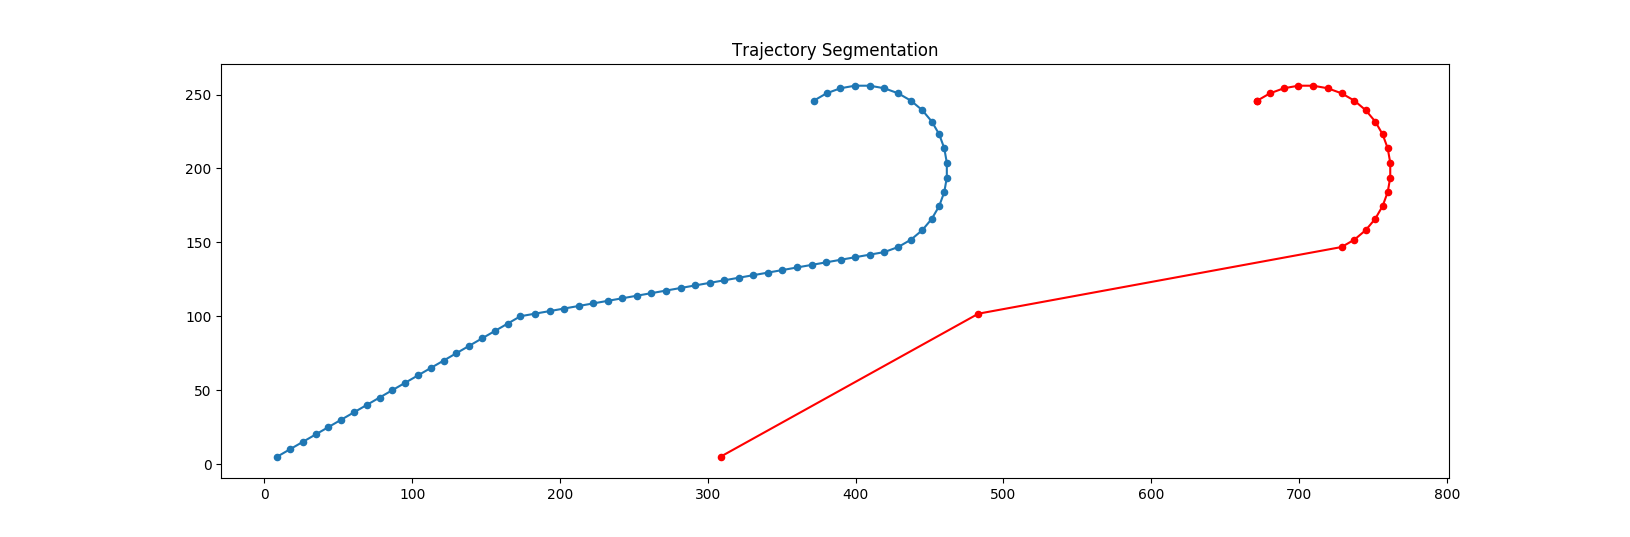 Trajectory optimization by removing insignificant points